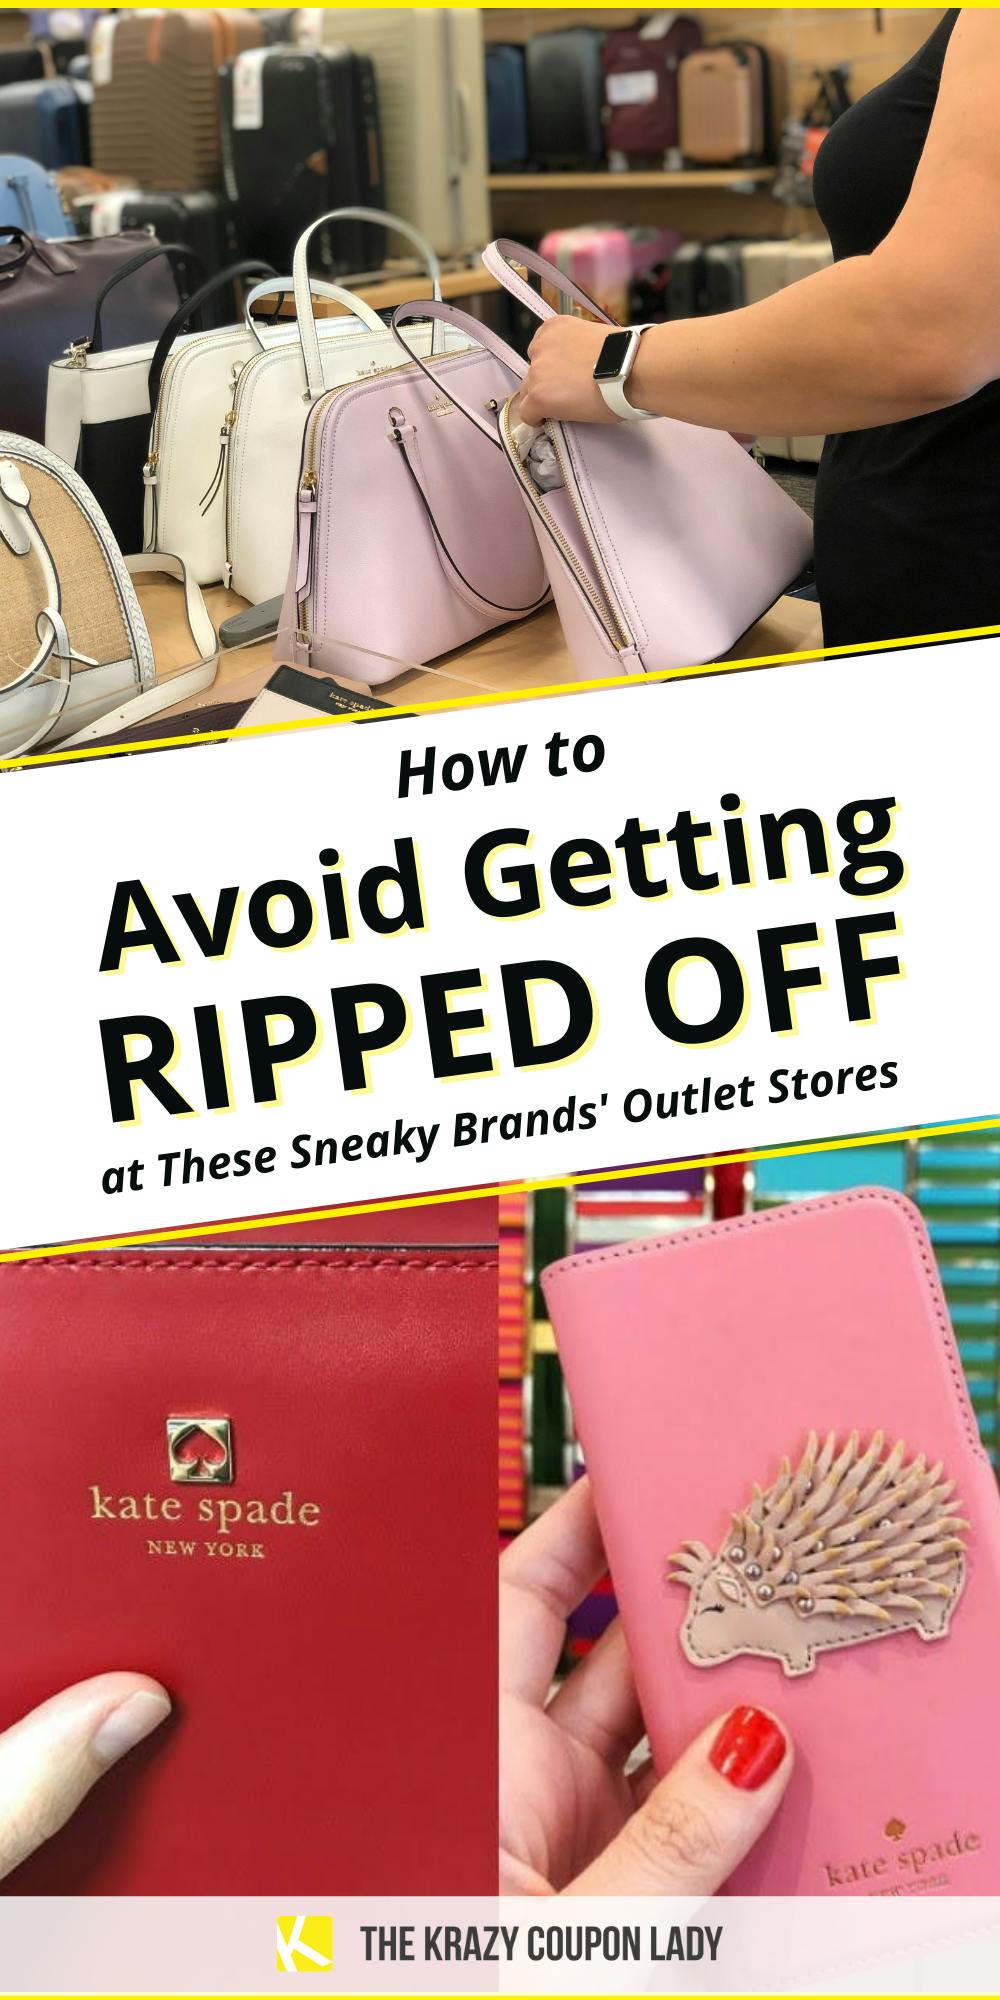 How to Avoid Getting Ripped Off at These 8 Outlet Stores